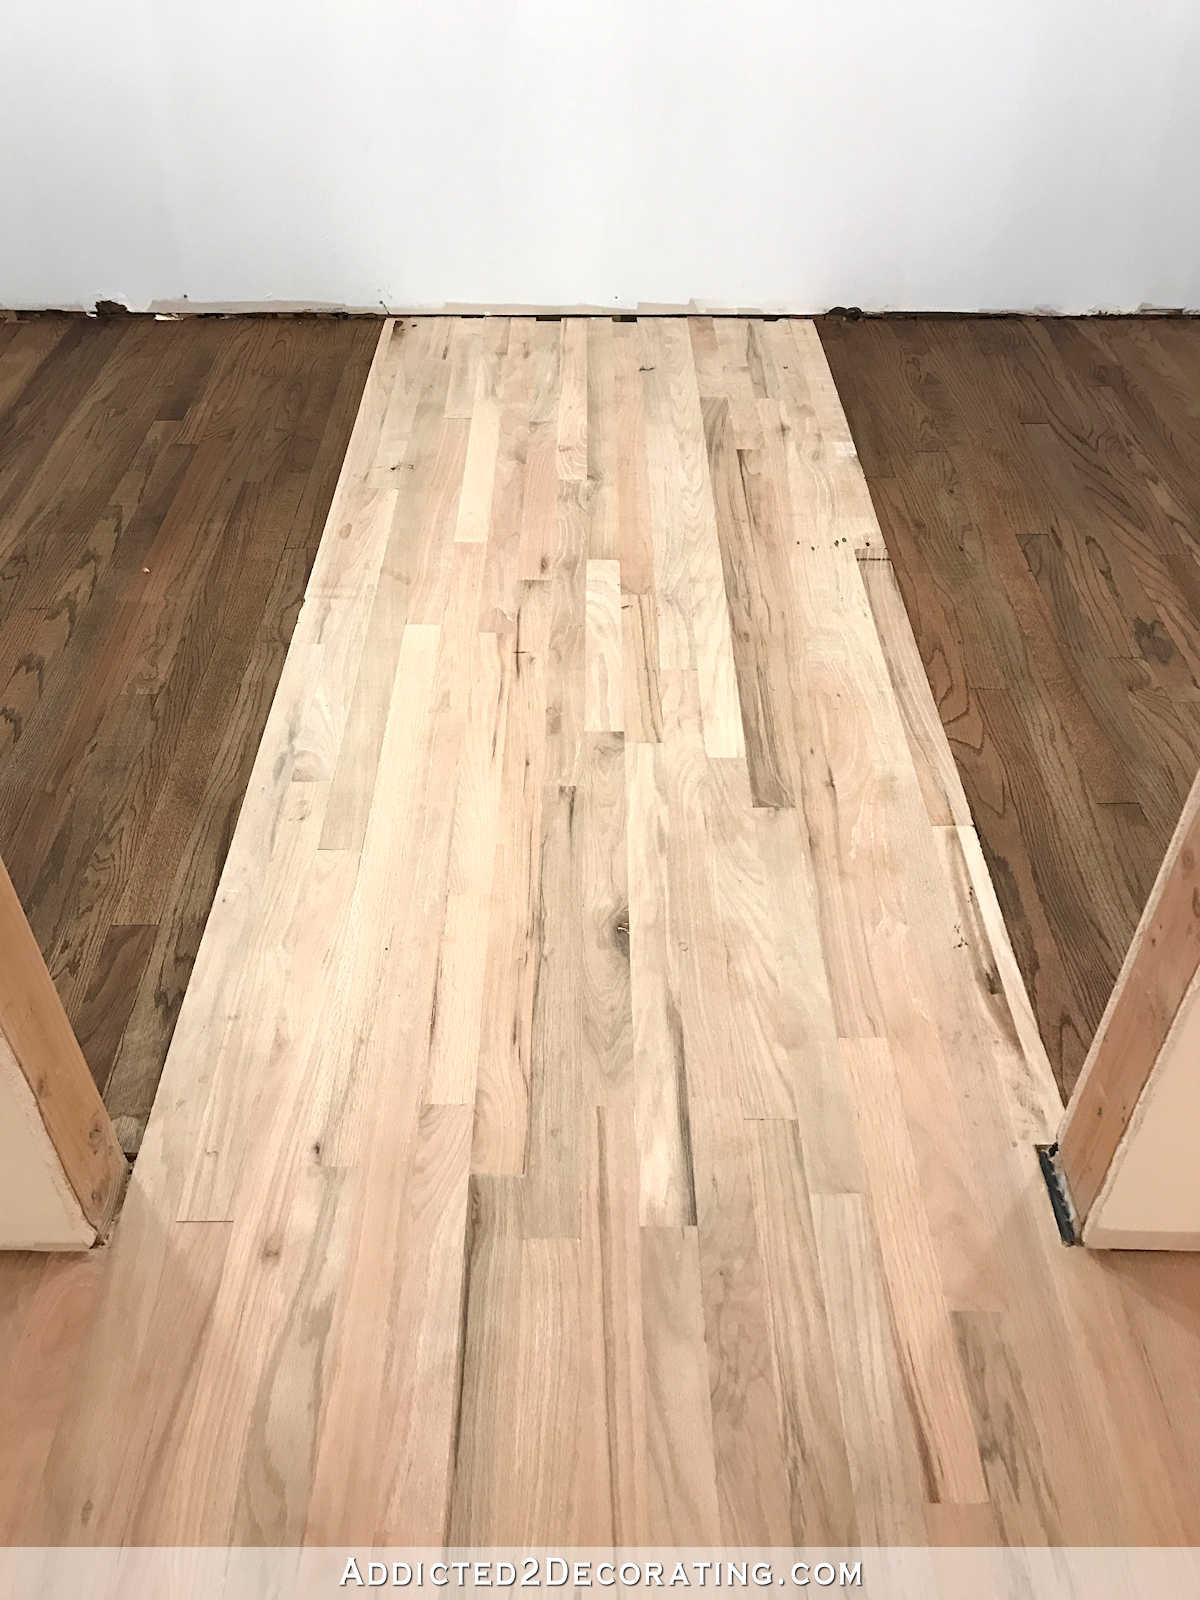 28 Famous 5 Red Oak Hardwood Flooring 2023 free download 5 red oak hardwood flooring of adventures in staining my red oak hardwood floors products process regarding staining red oak hardwood floors 11 stain on left and right sides of the